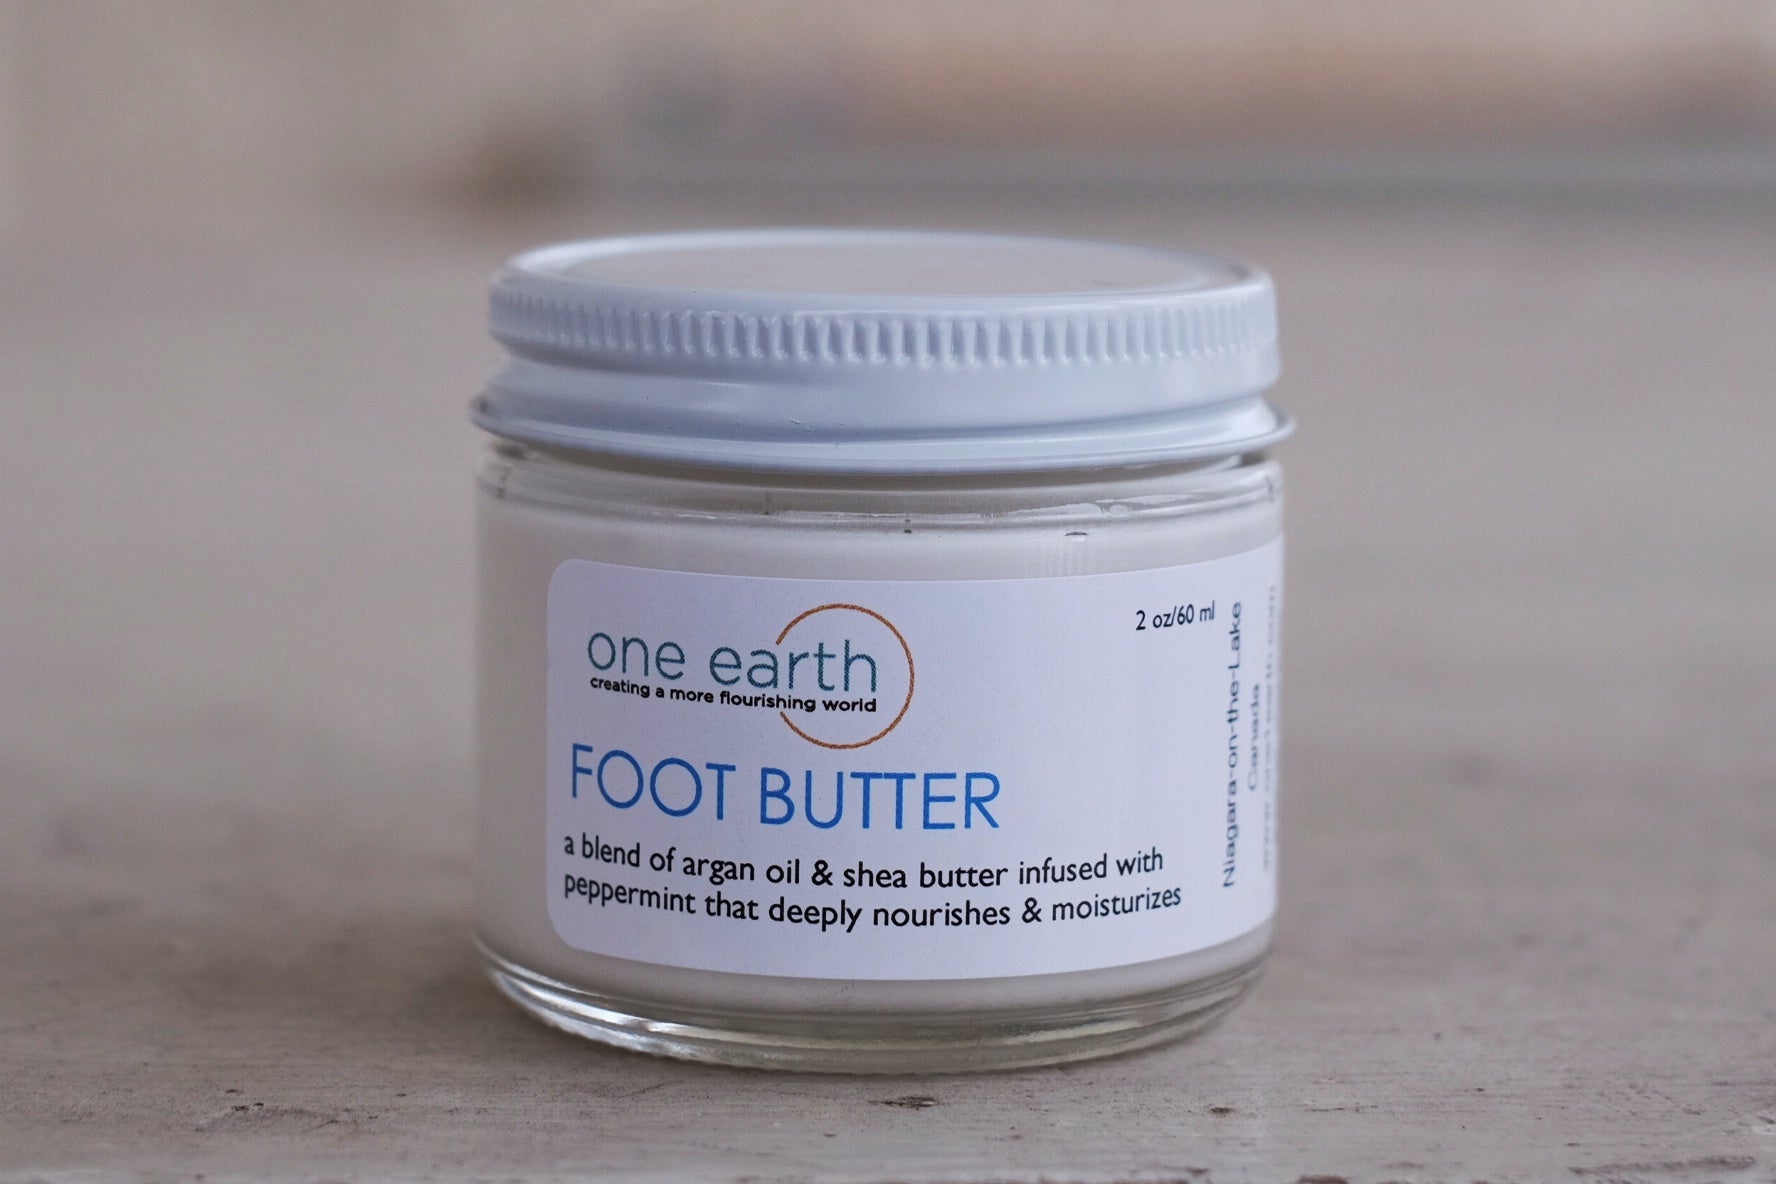 – Earth One Butter Foot